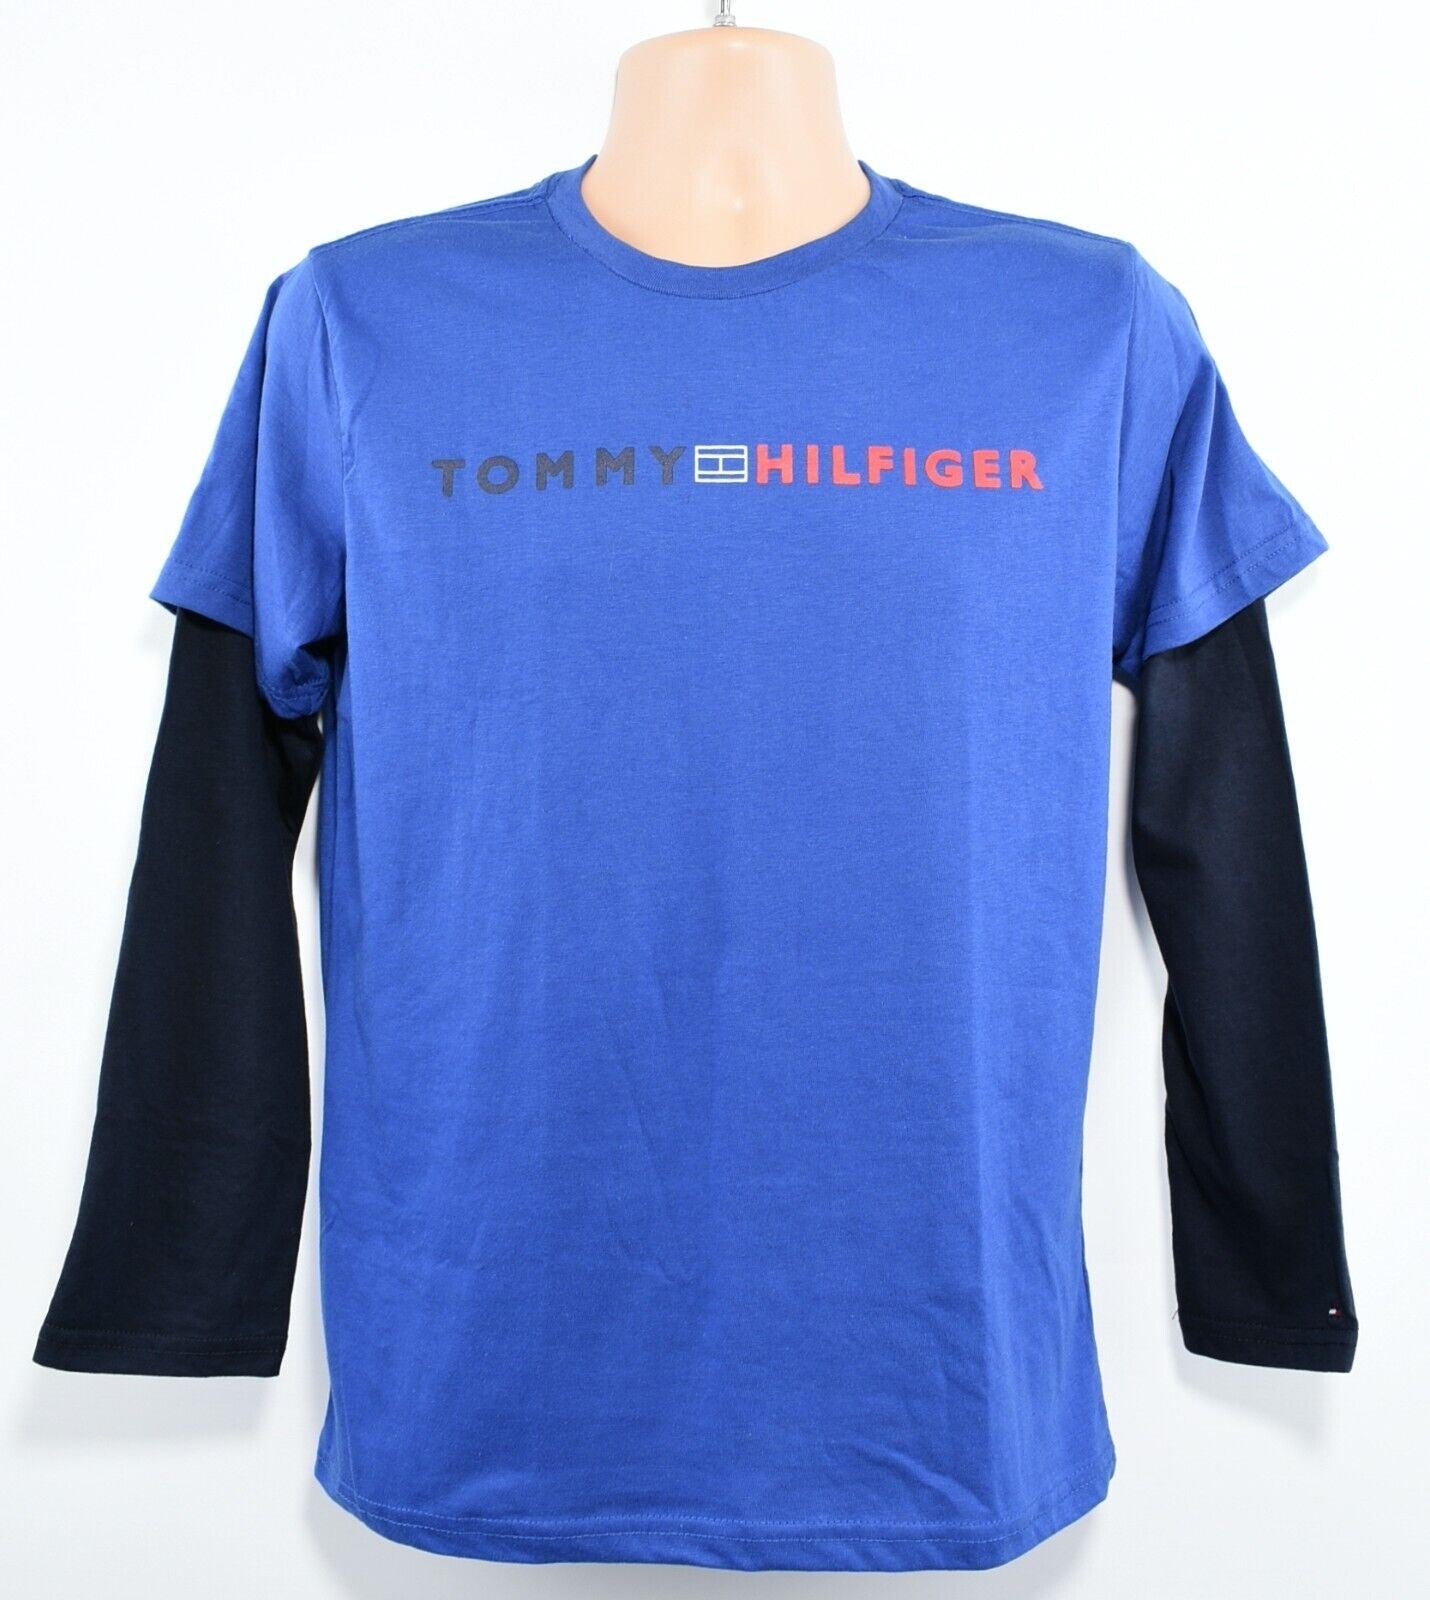 TOMMY HILFIGER Boys' Layered Look T-shirt Top, Monaco Blue, size 16-18 years